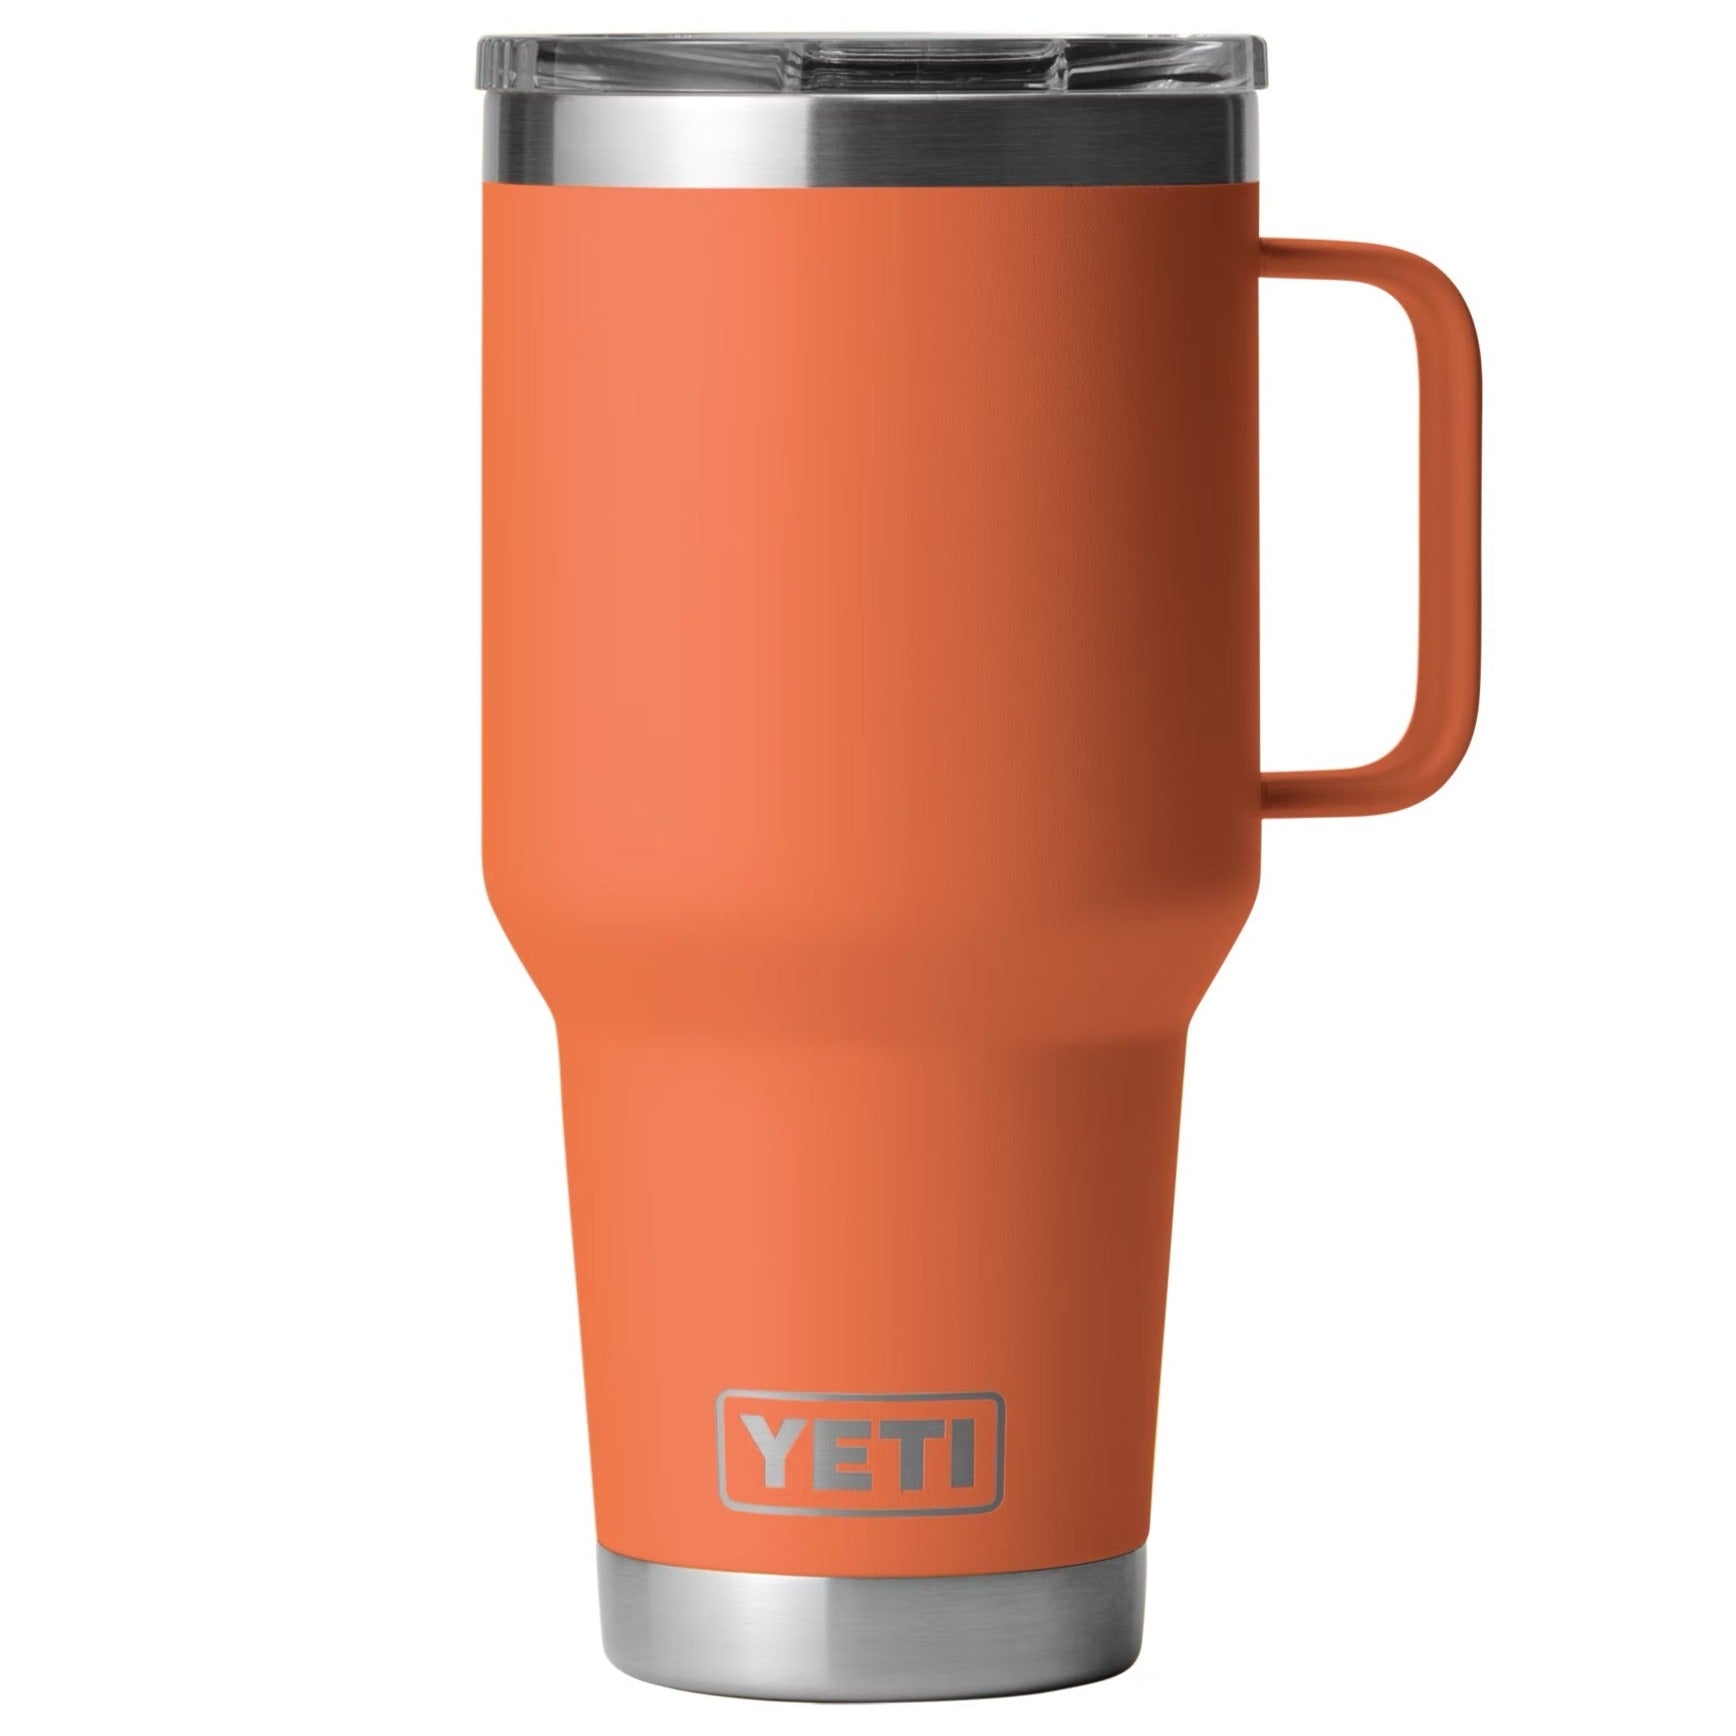 Cup Holder Insert for Yeti Tumblers, Yeti Colsters, Brumate Coozie